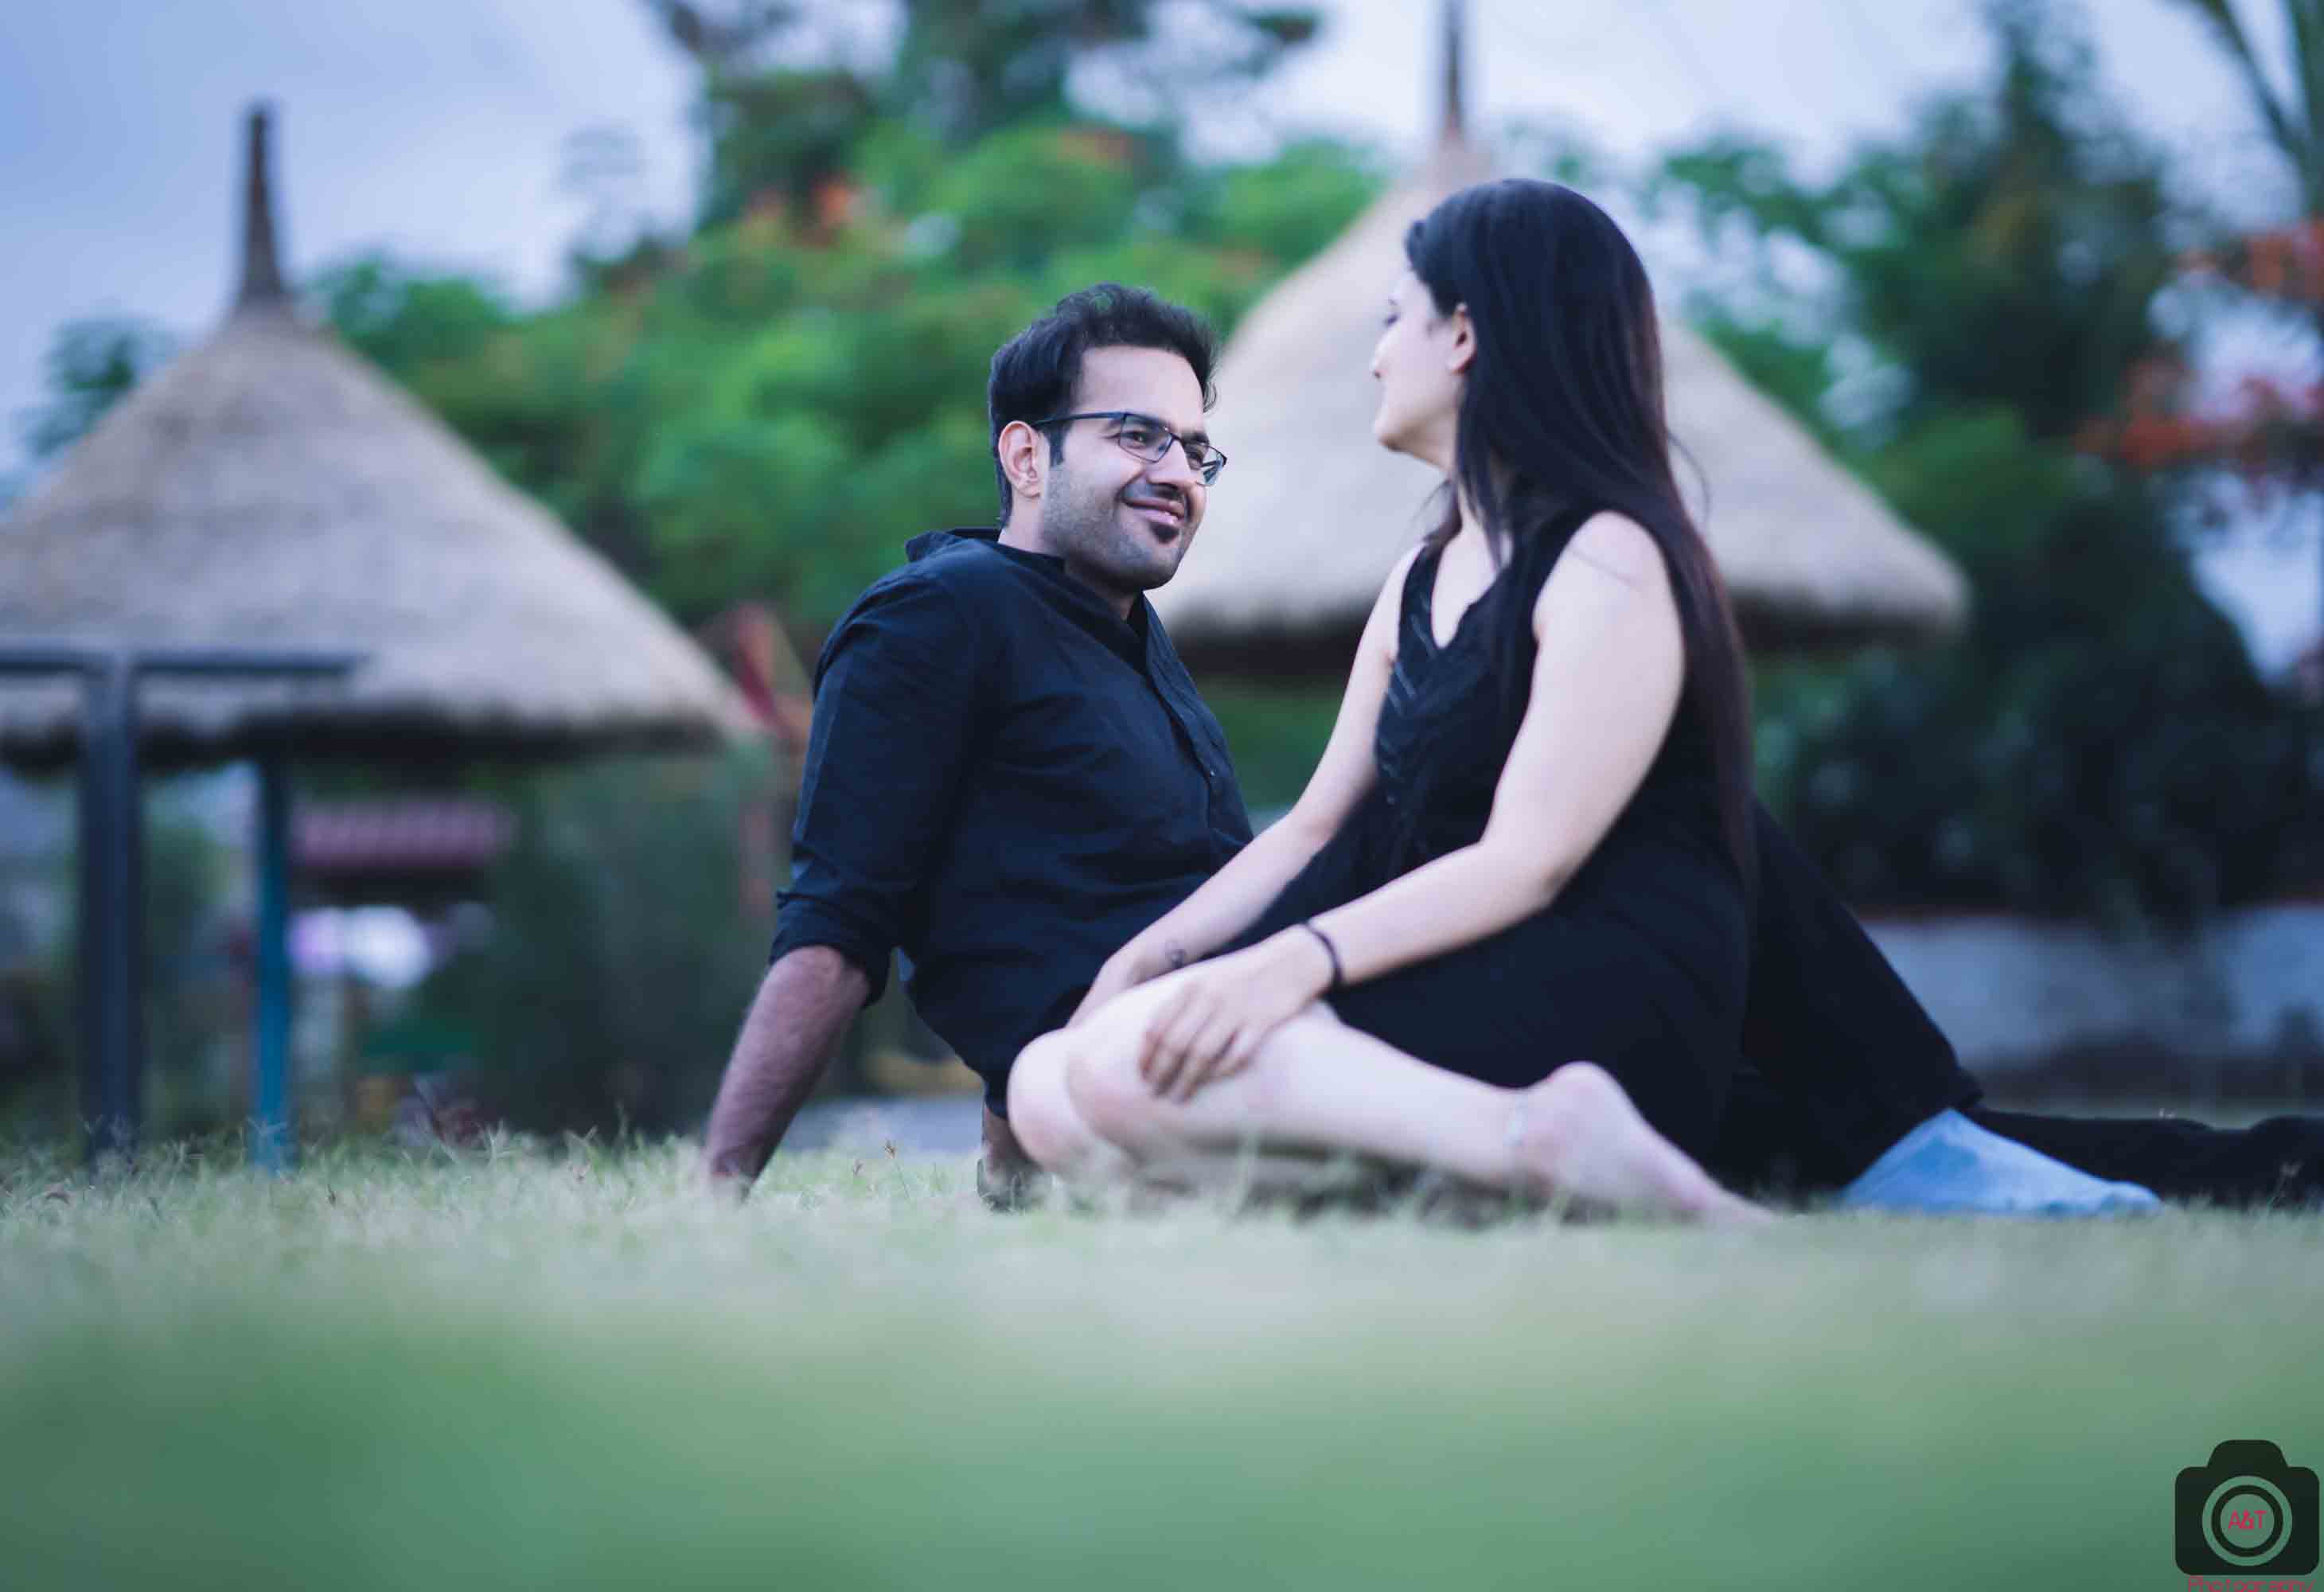 Pre-wedding in Garden|Shilpa & Pulkit| A&T Photography| Best Pre-wedding Photographer in Pune, India